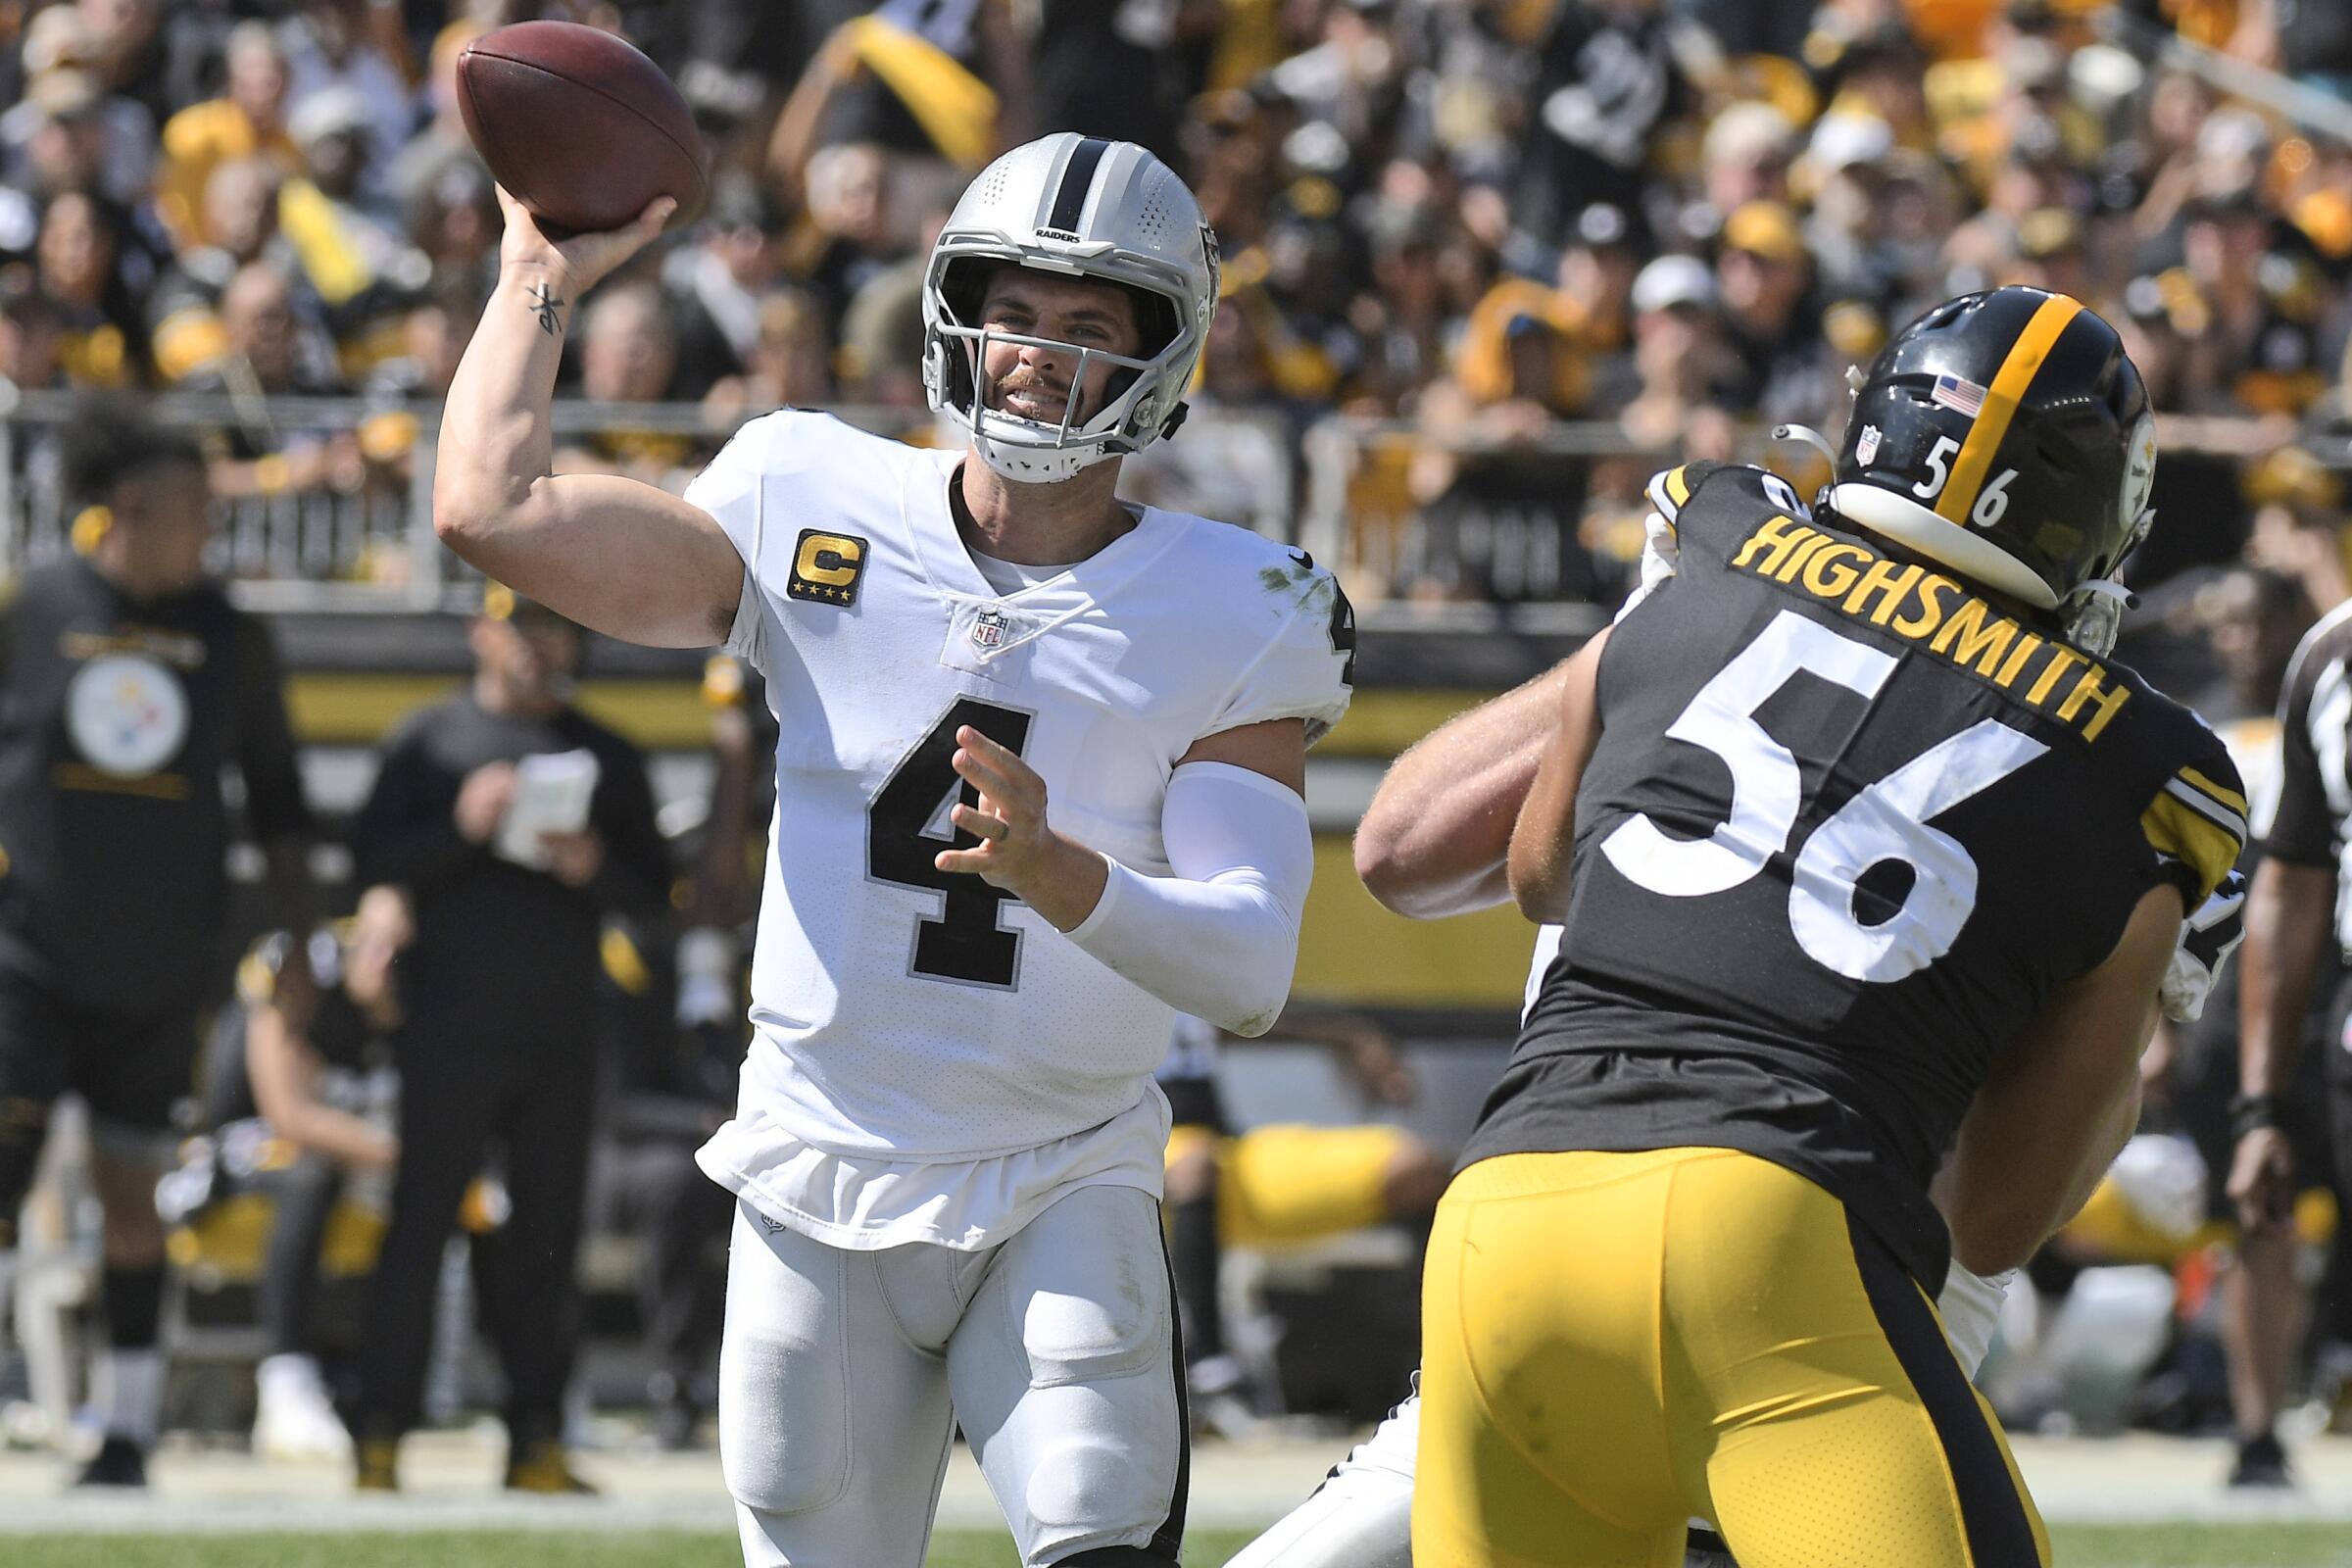 Steelers and Raiders both have room to improve heading into Sunday